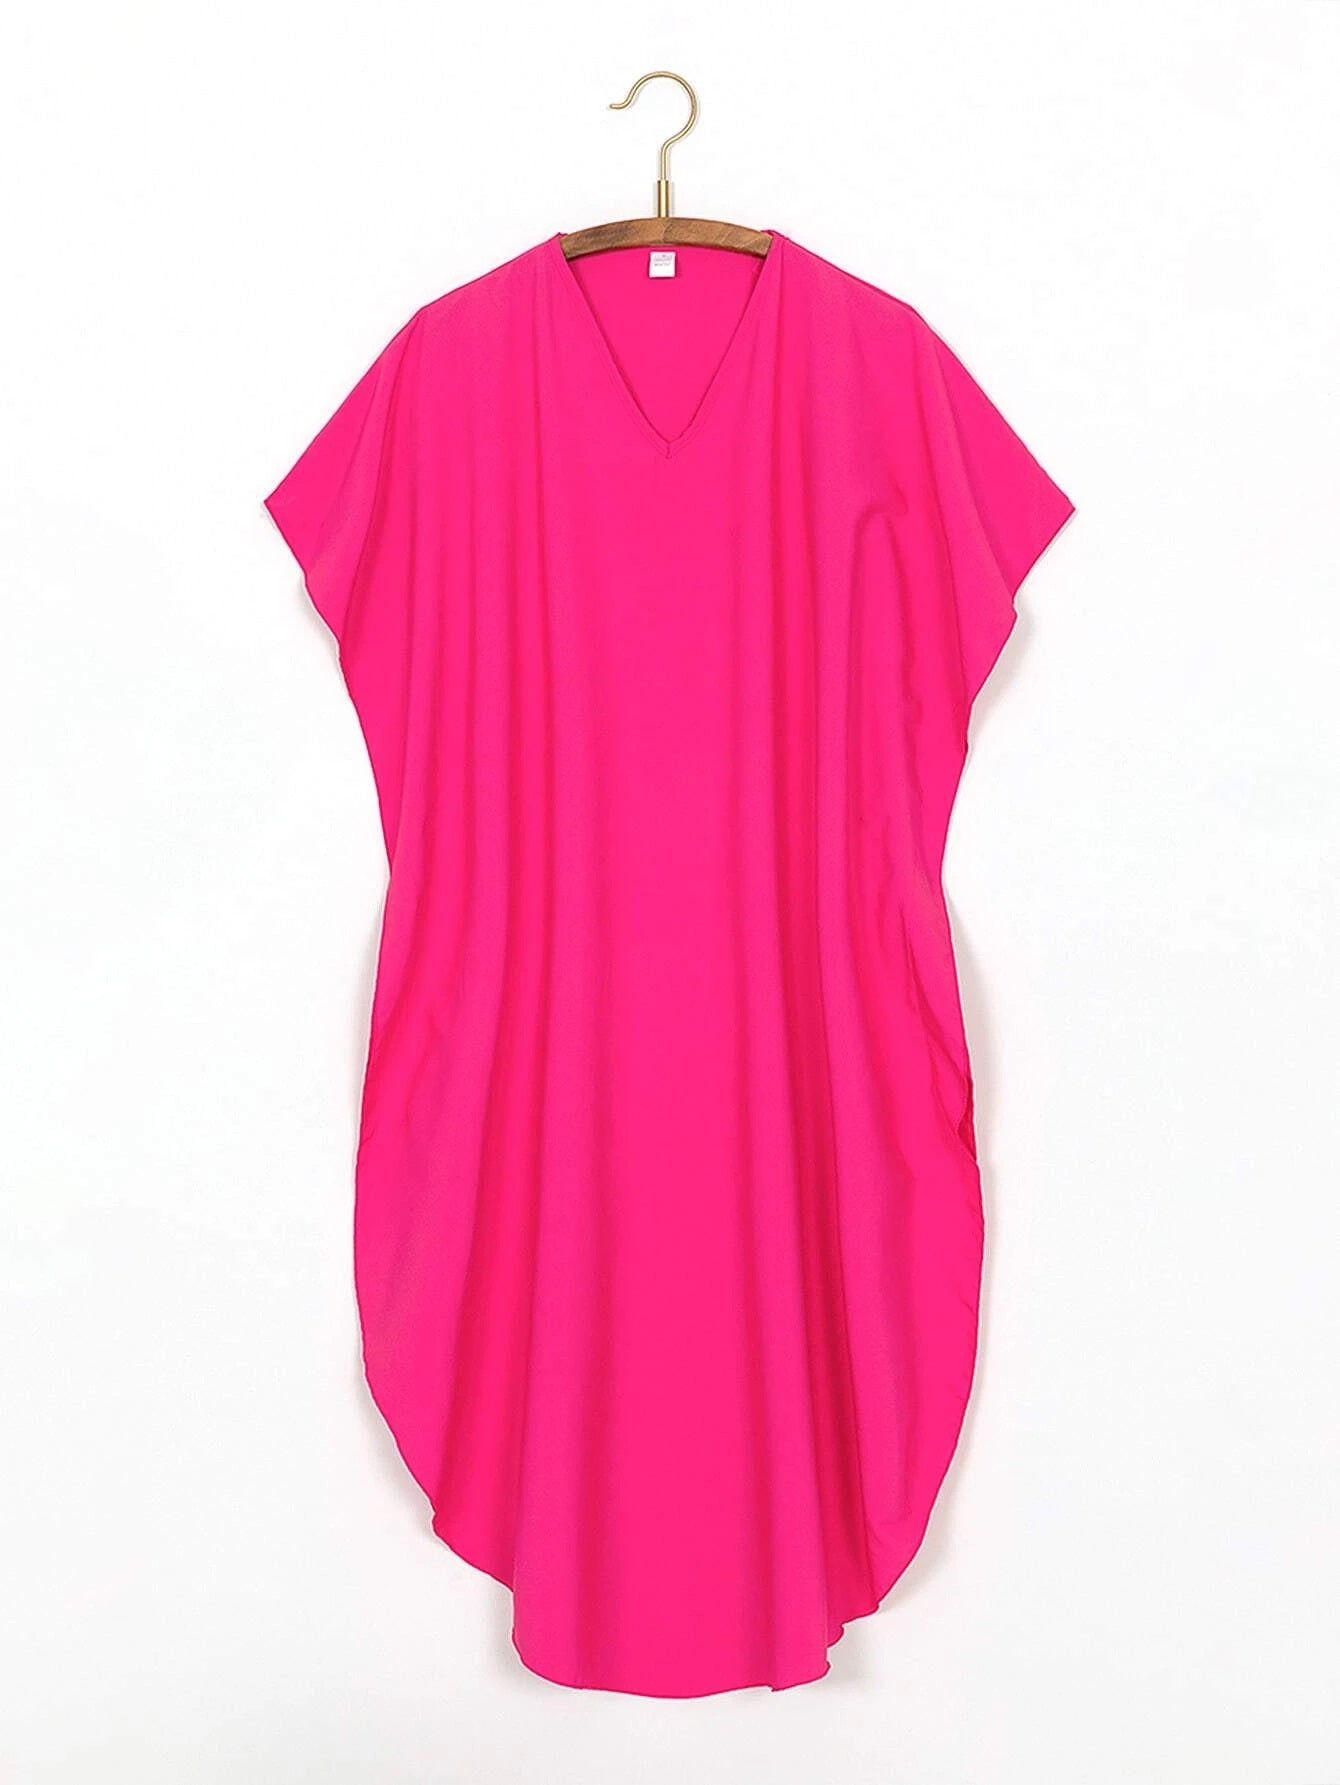 CM-SWS020381 Women Trendy Bohemian Style Solid Batwing Sleeve Cover Up Dress - Hot Pink